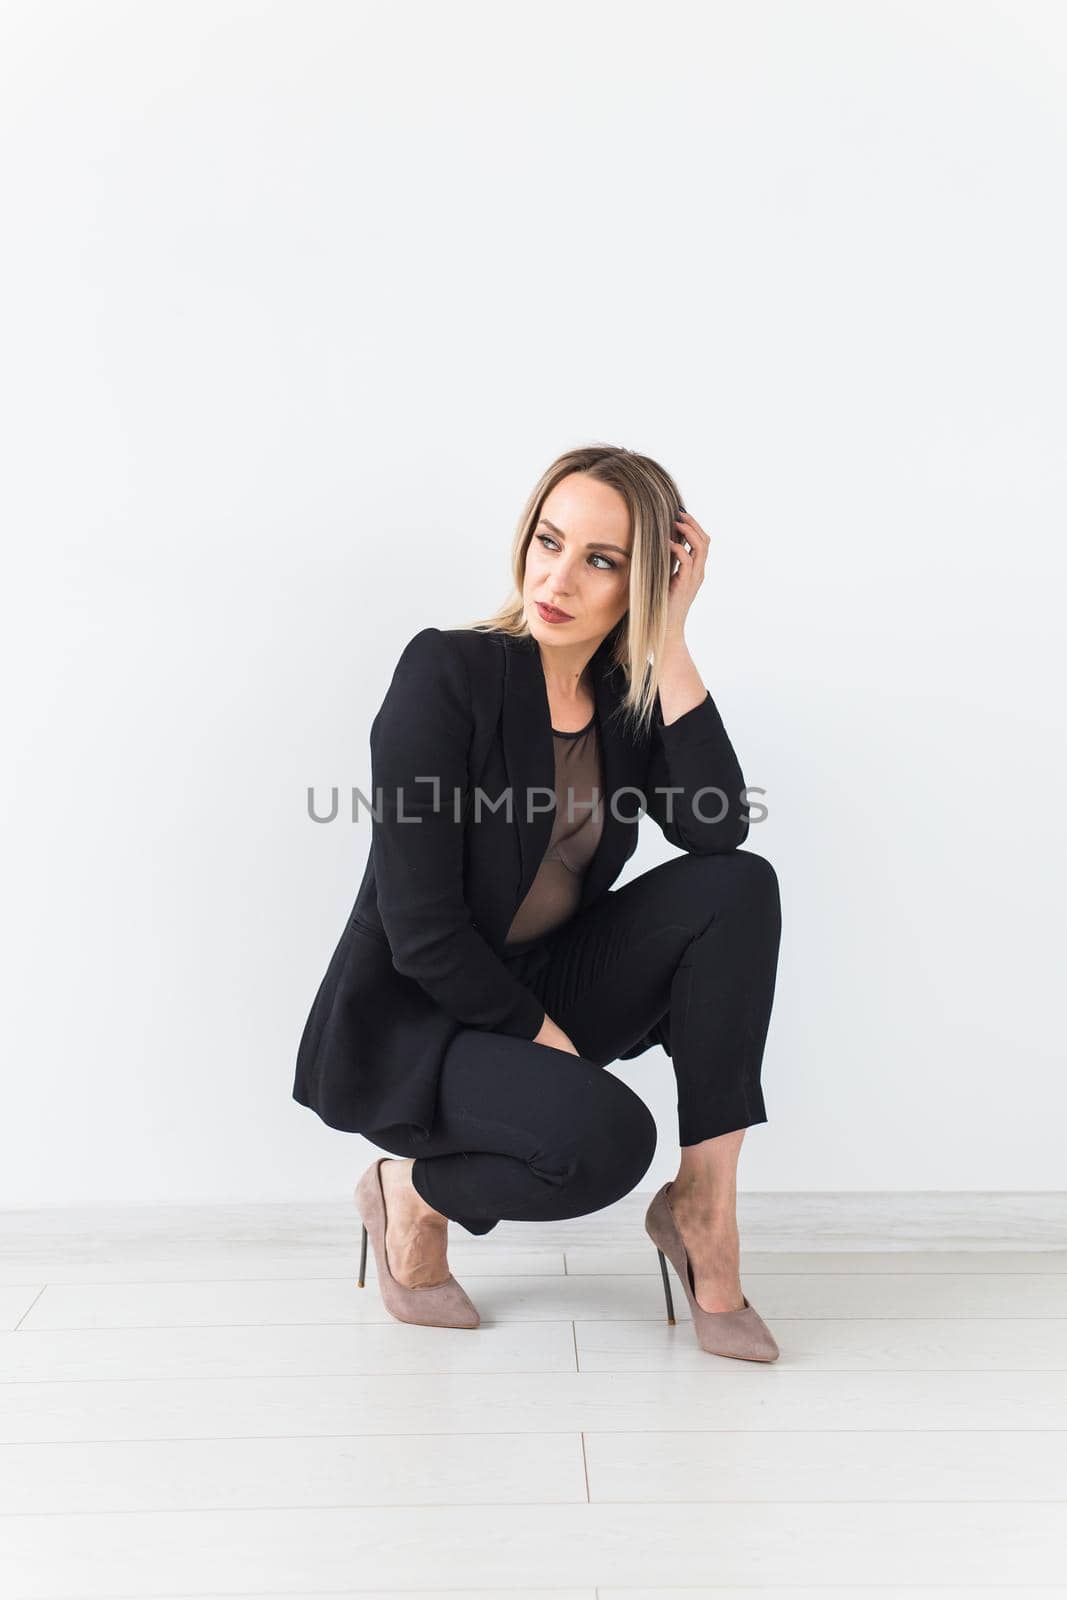 Fashion concept - Portrait of sexy business woman in a suit on white background. by Satura86